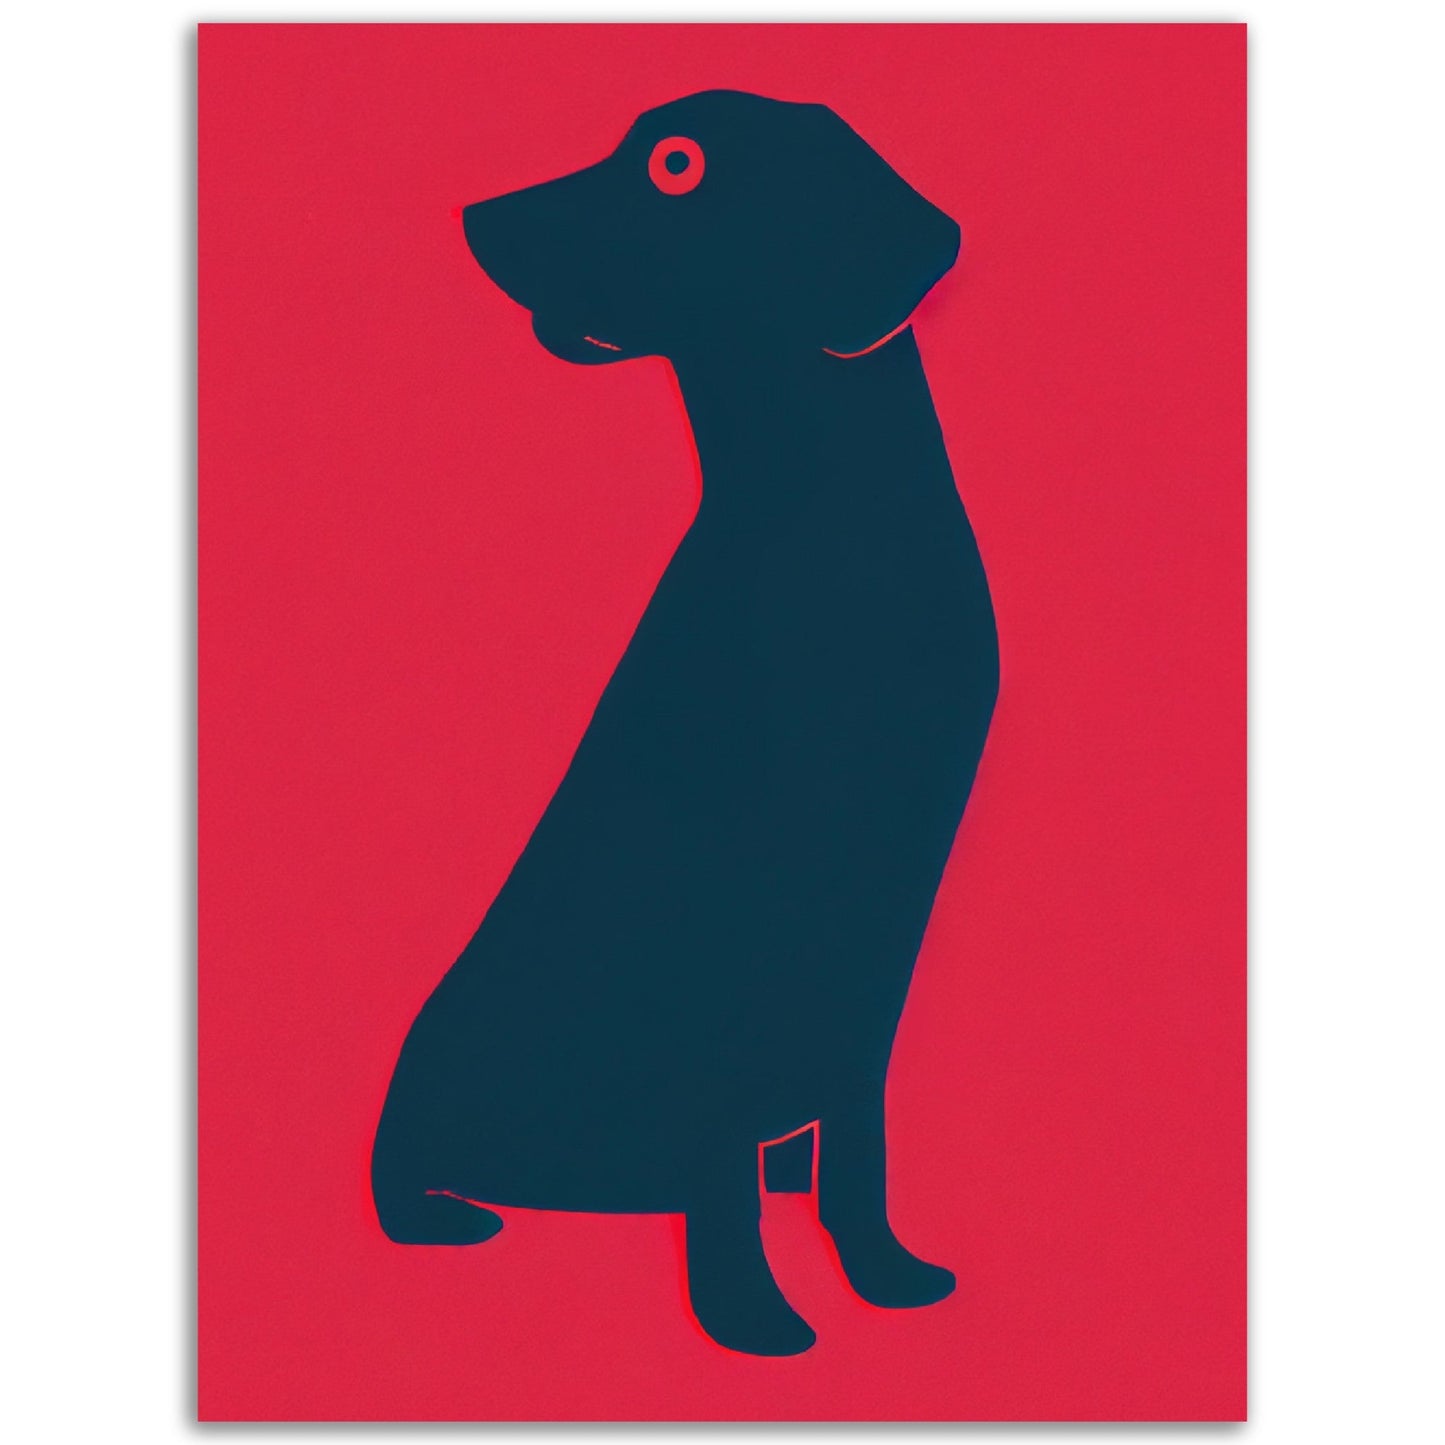 A Pop Art Her Masters Voice featuring a silhouette of a black dog on a red background.